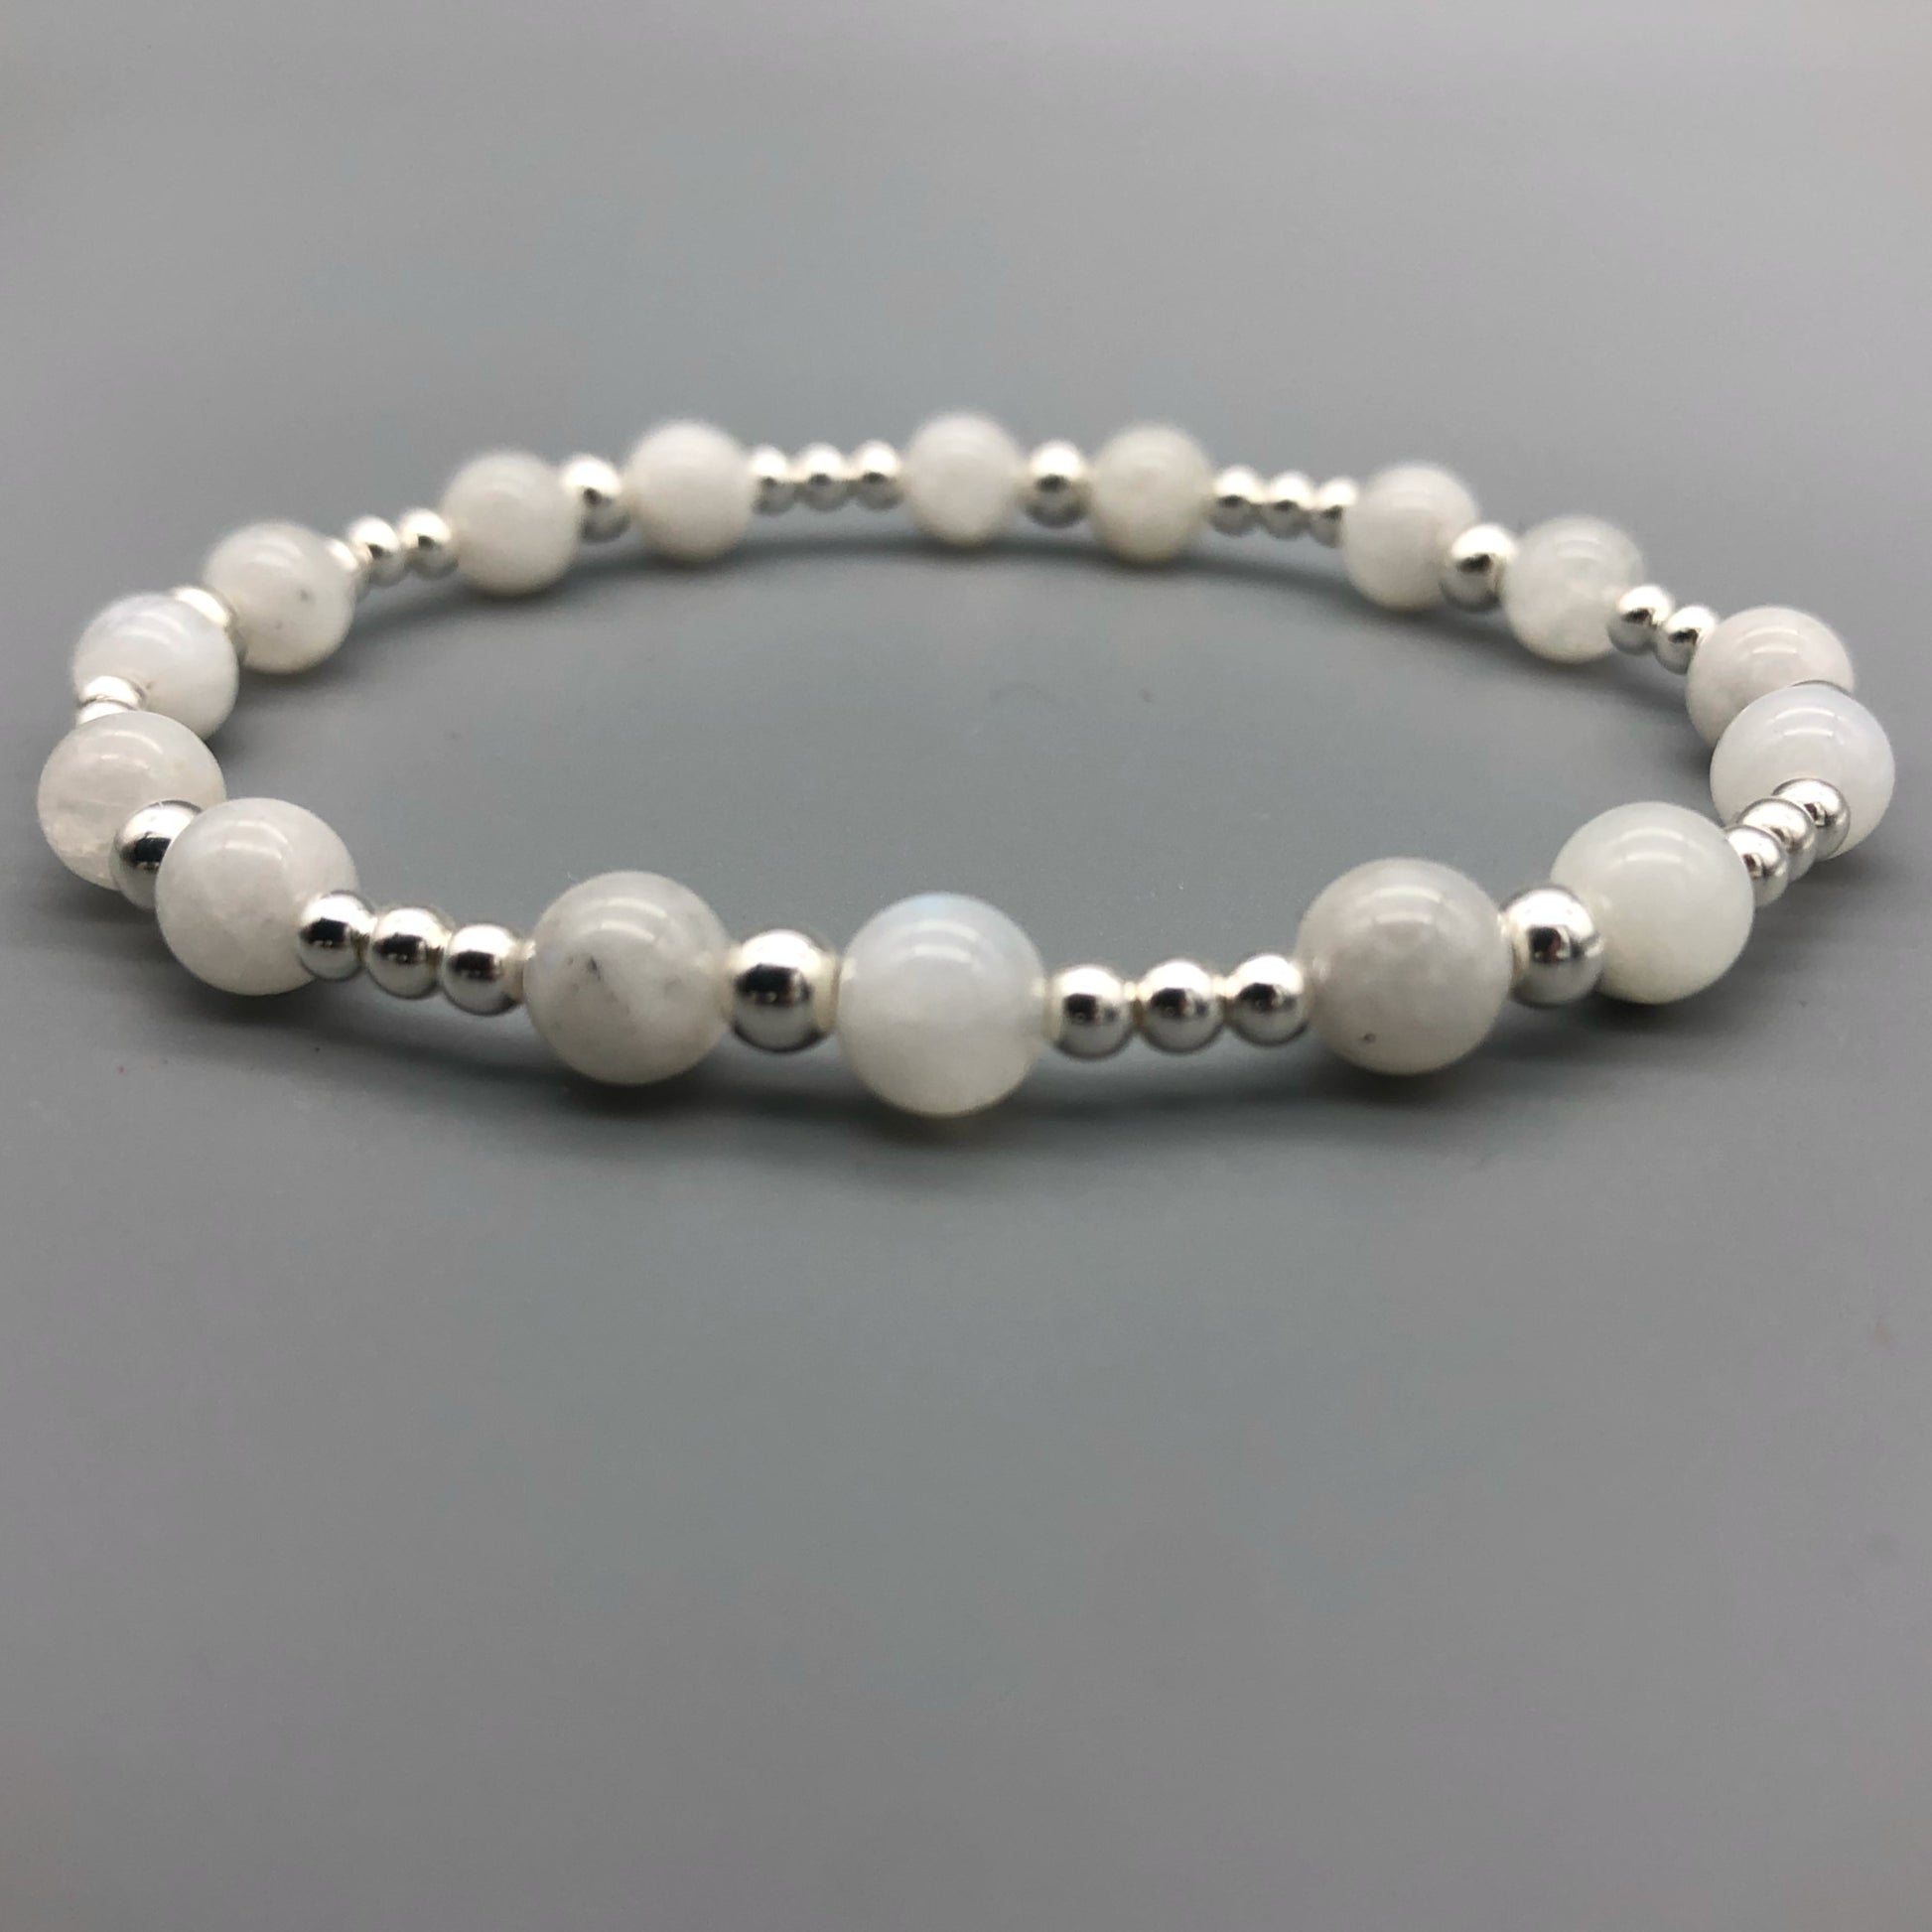 Moonstone crystal and sterling silver women's stacking bracelet by My Silver Wish